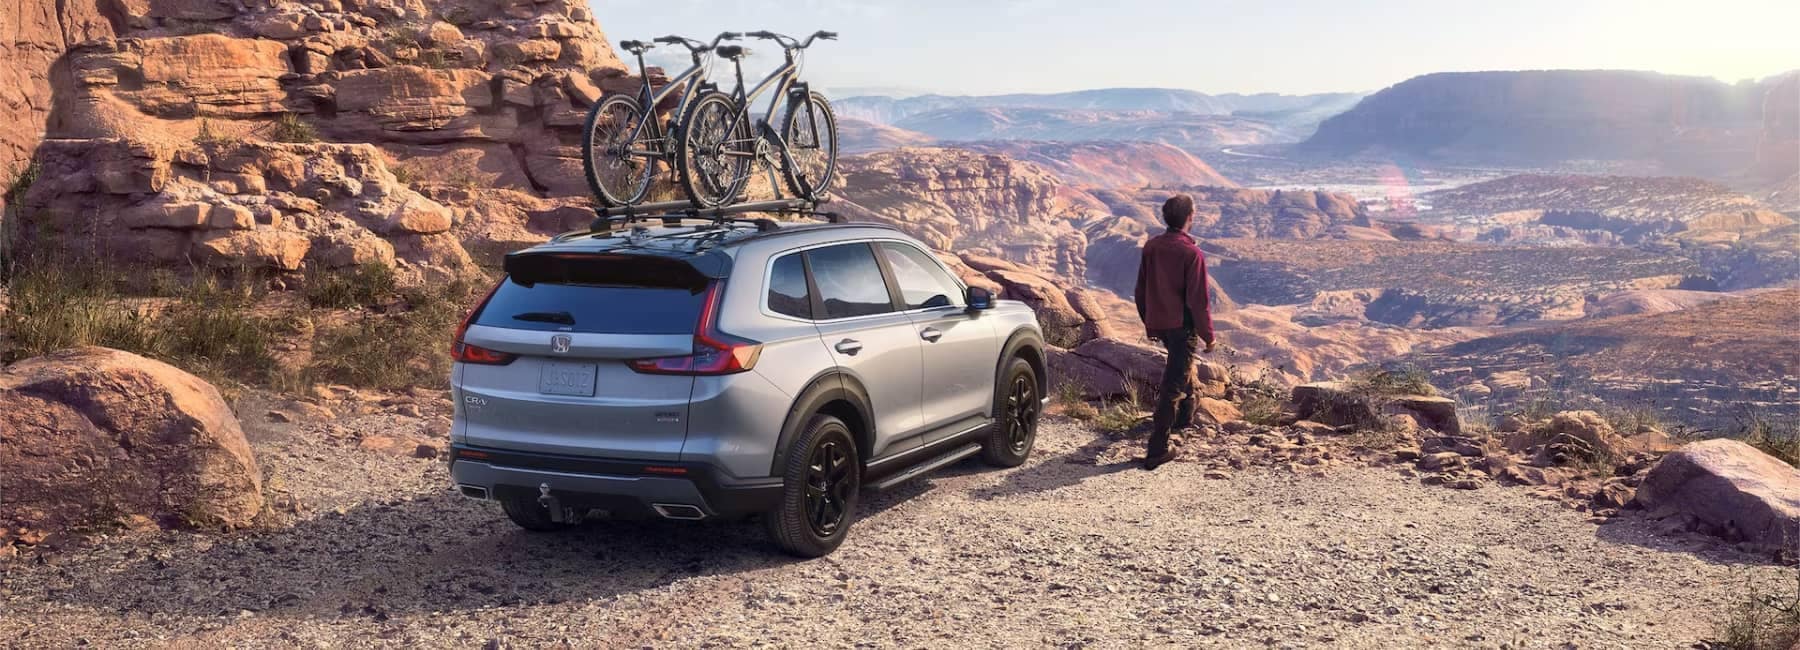 Grey Honda CR-V in the desert with two mountain bikes on the roof rack